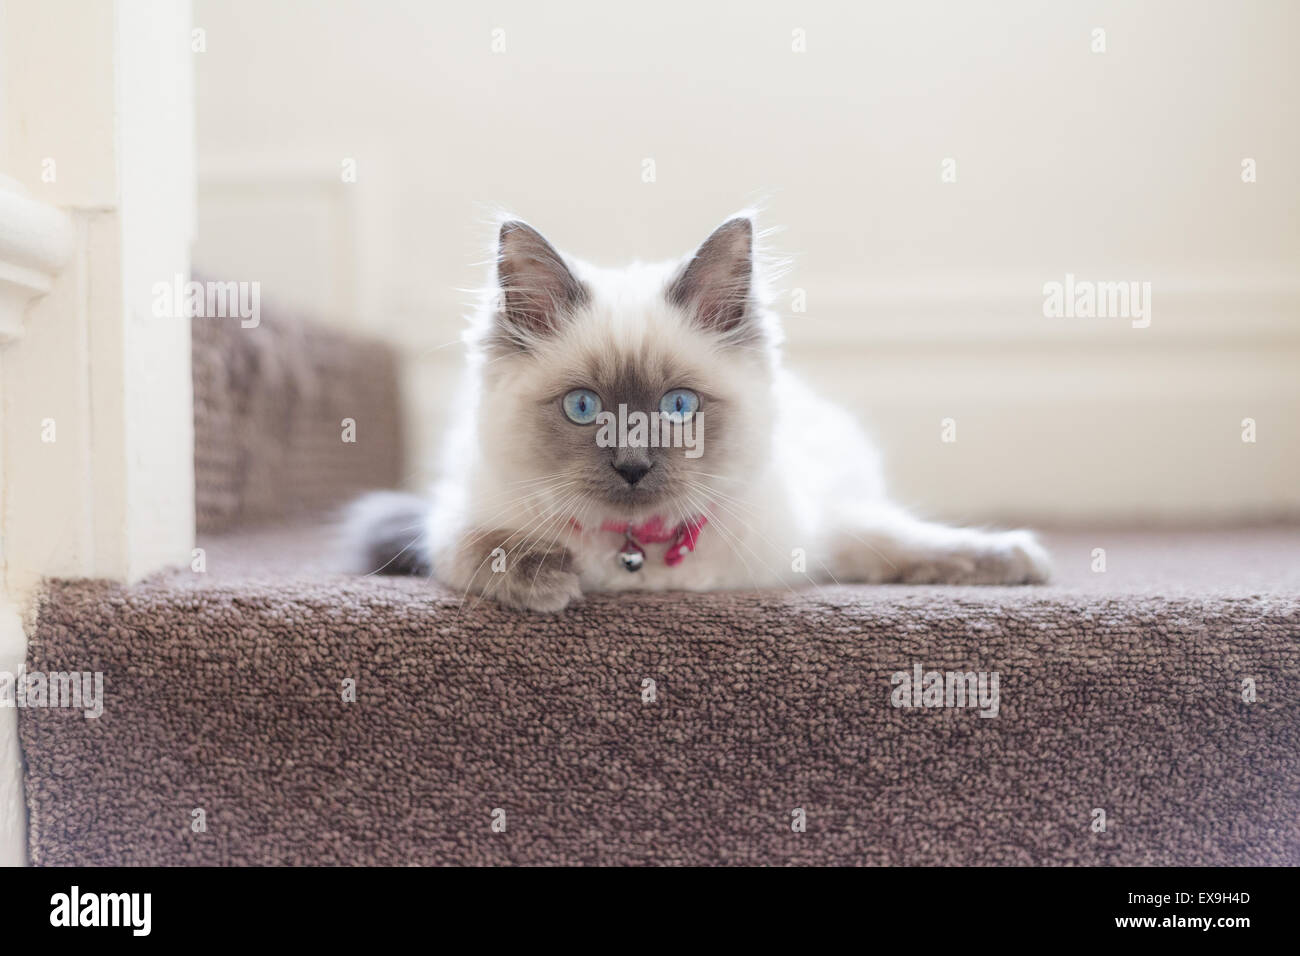 Cat Bell High Resolution Stock Photography and Images - Alamy